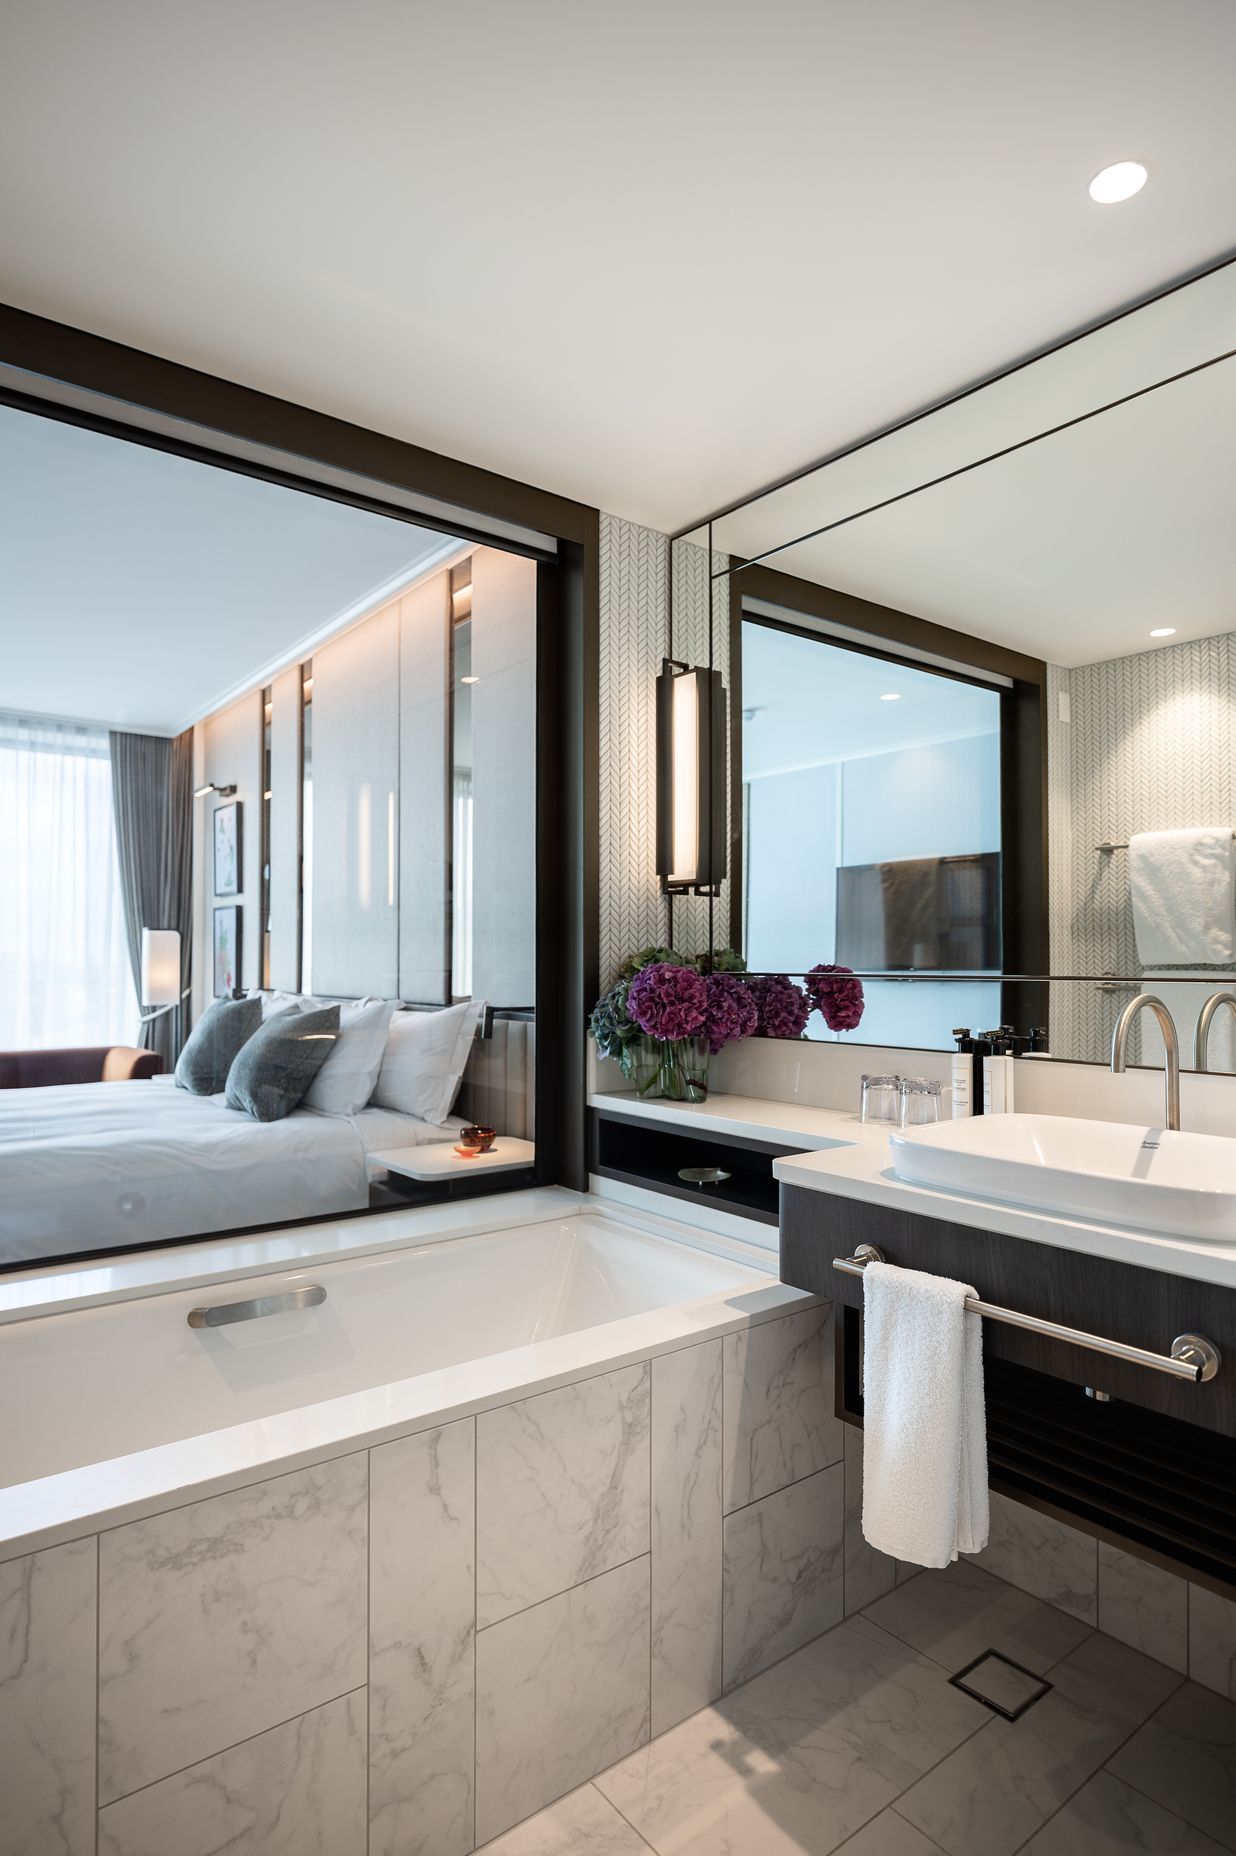 A hotel room en suite reflects the light through expansive mirrors.